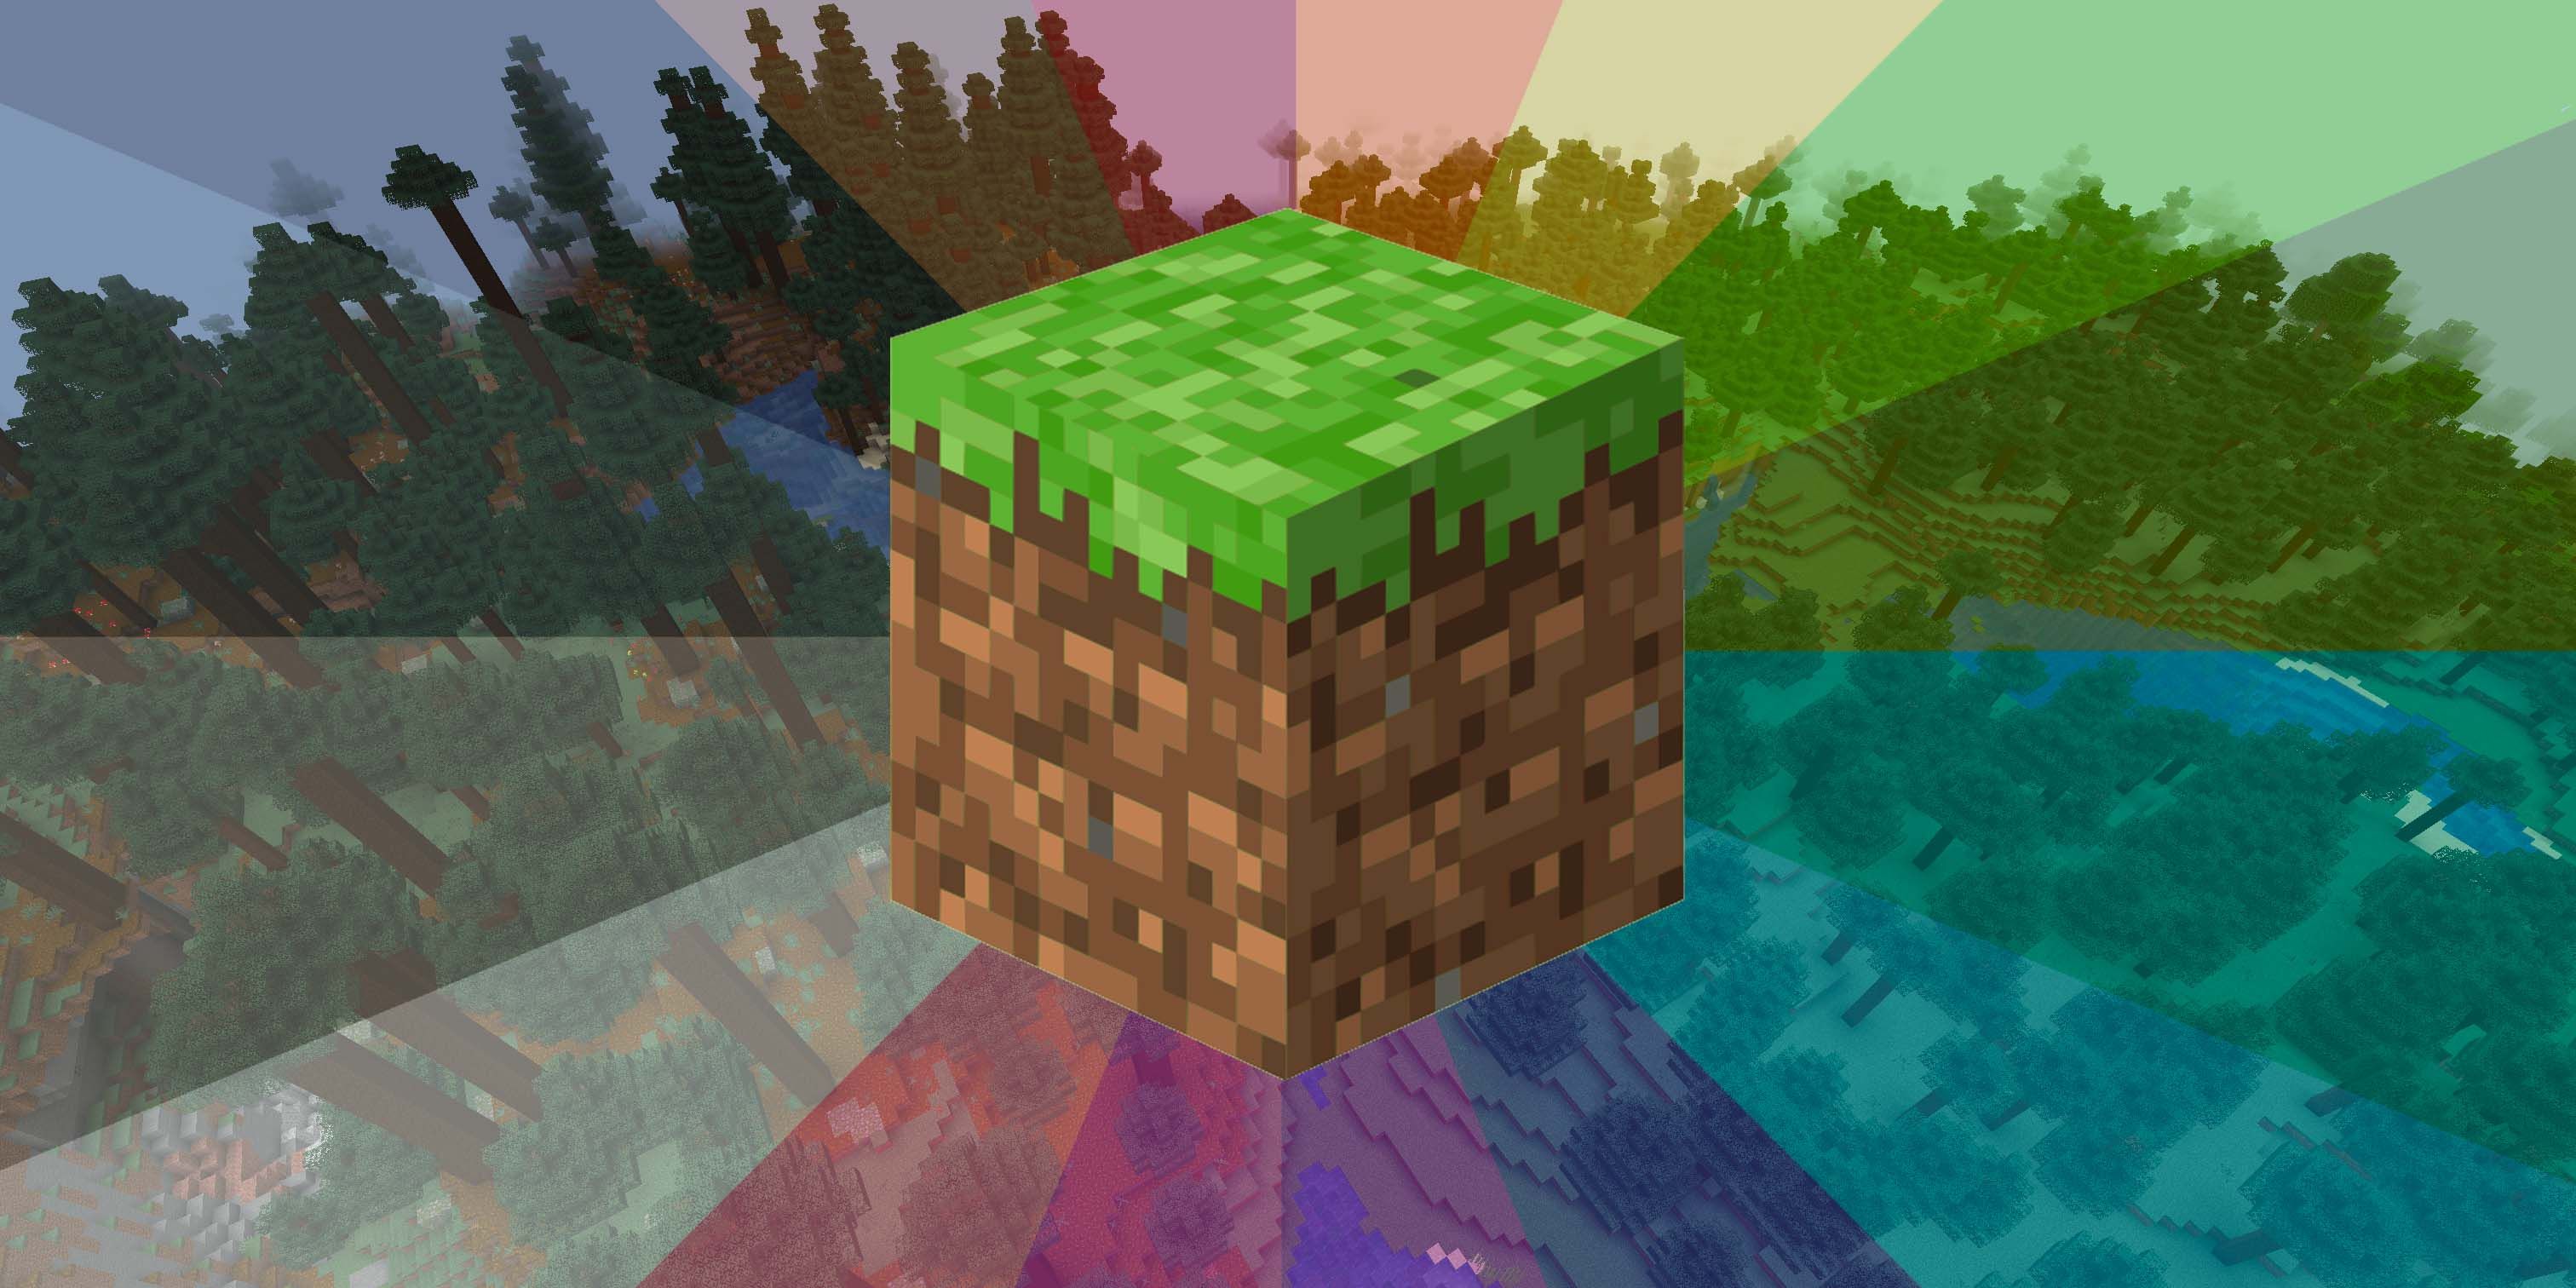 A Minecraft grass block surrounded by rays of different prismatic colors.